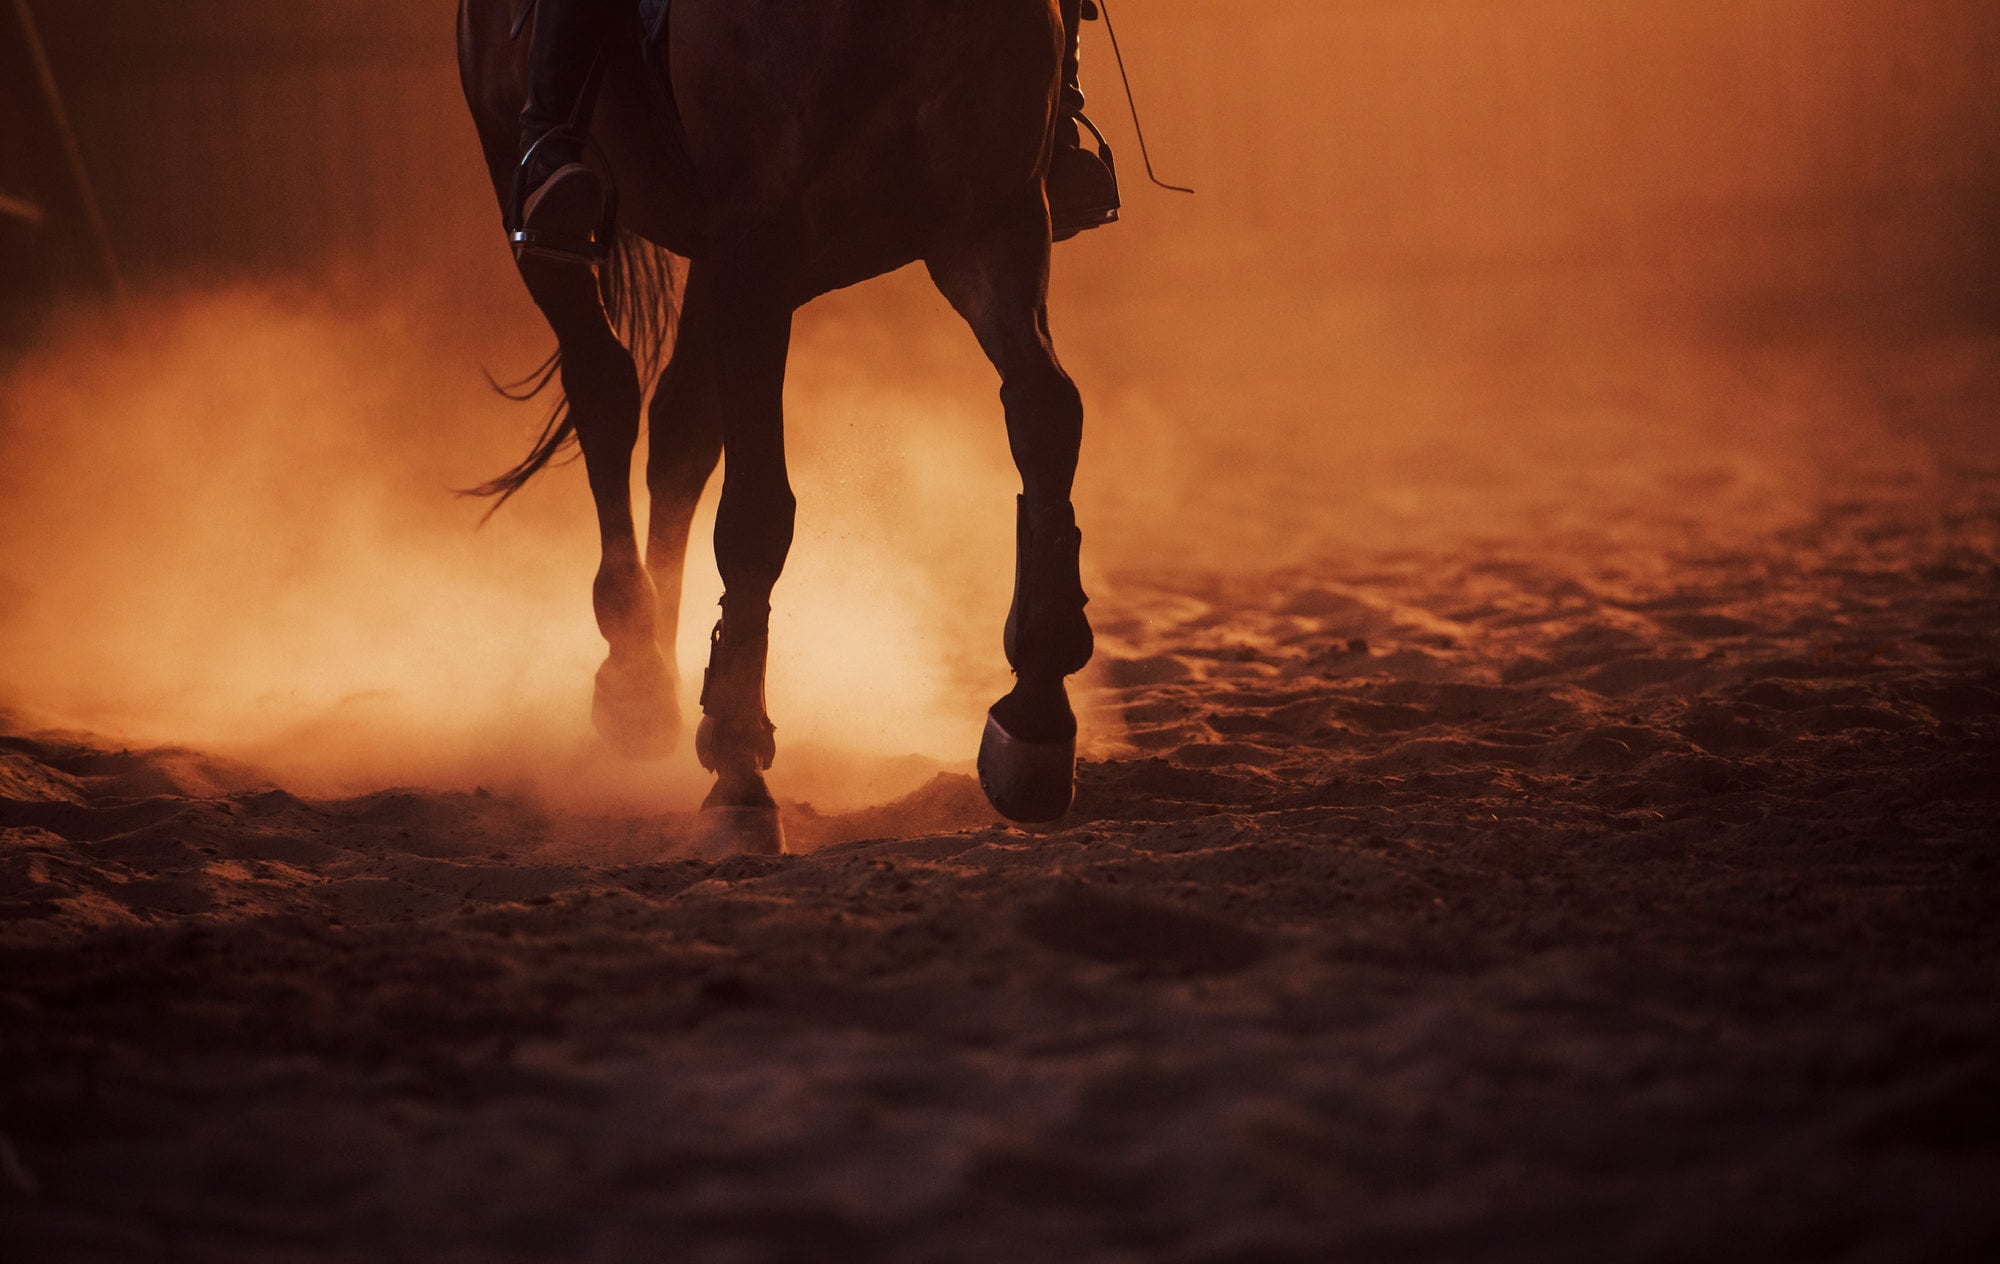 Majestic image of horse silhouette with rider on sunset background